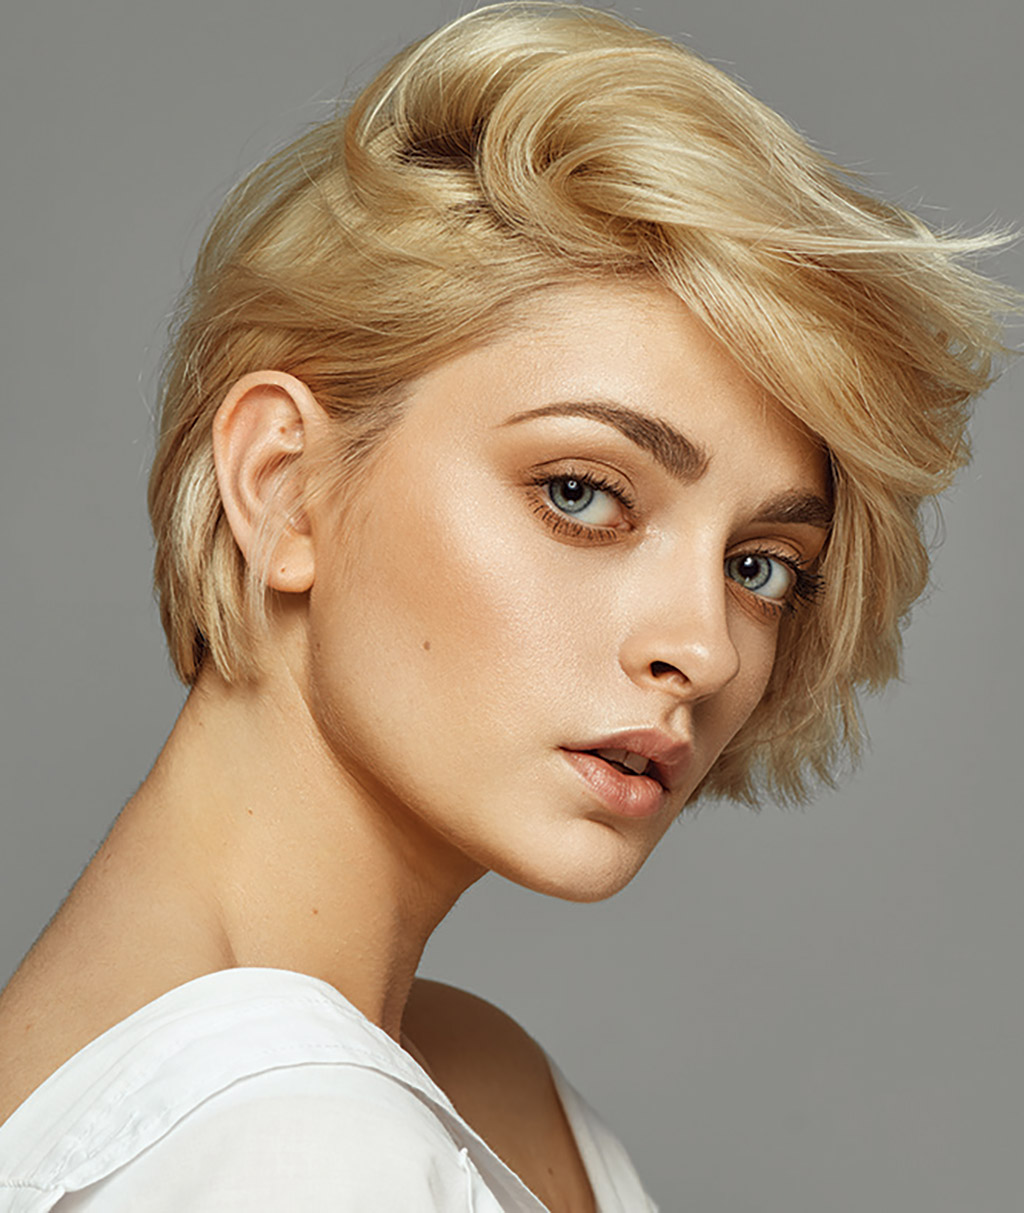 woman with short blonde hair